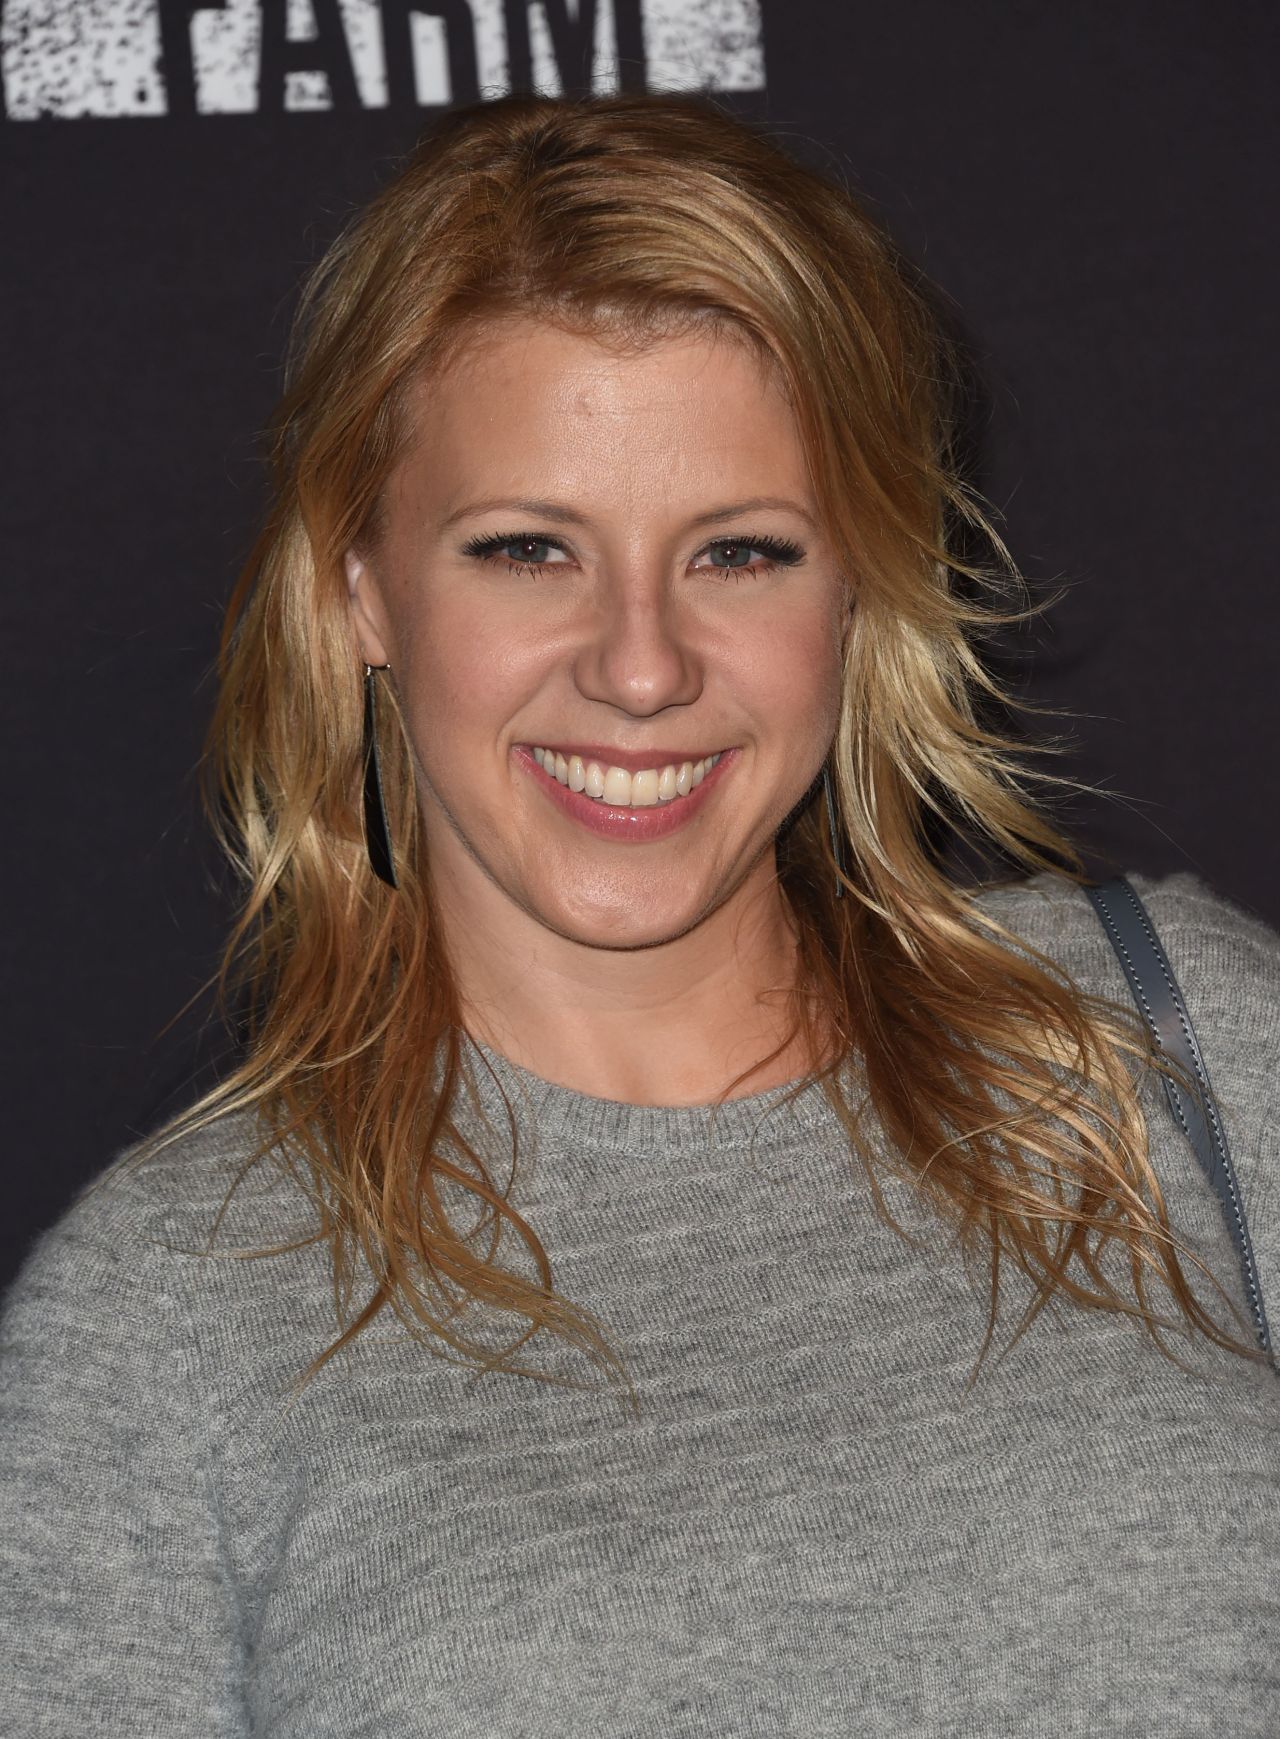 Jodie sweetin hot pictures